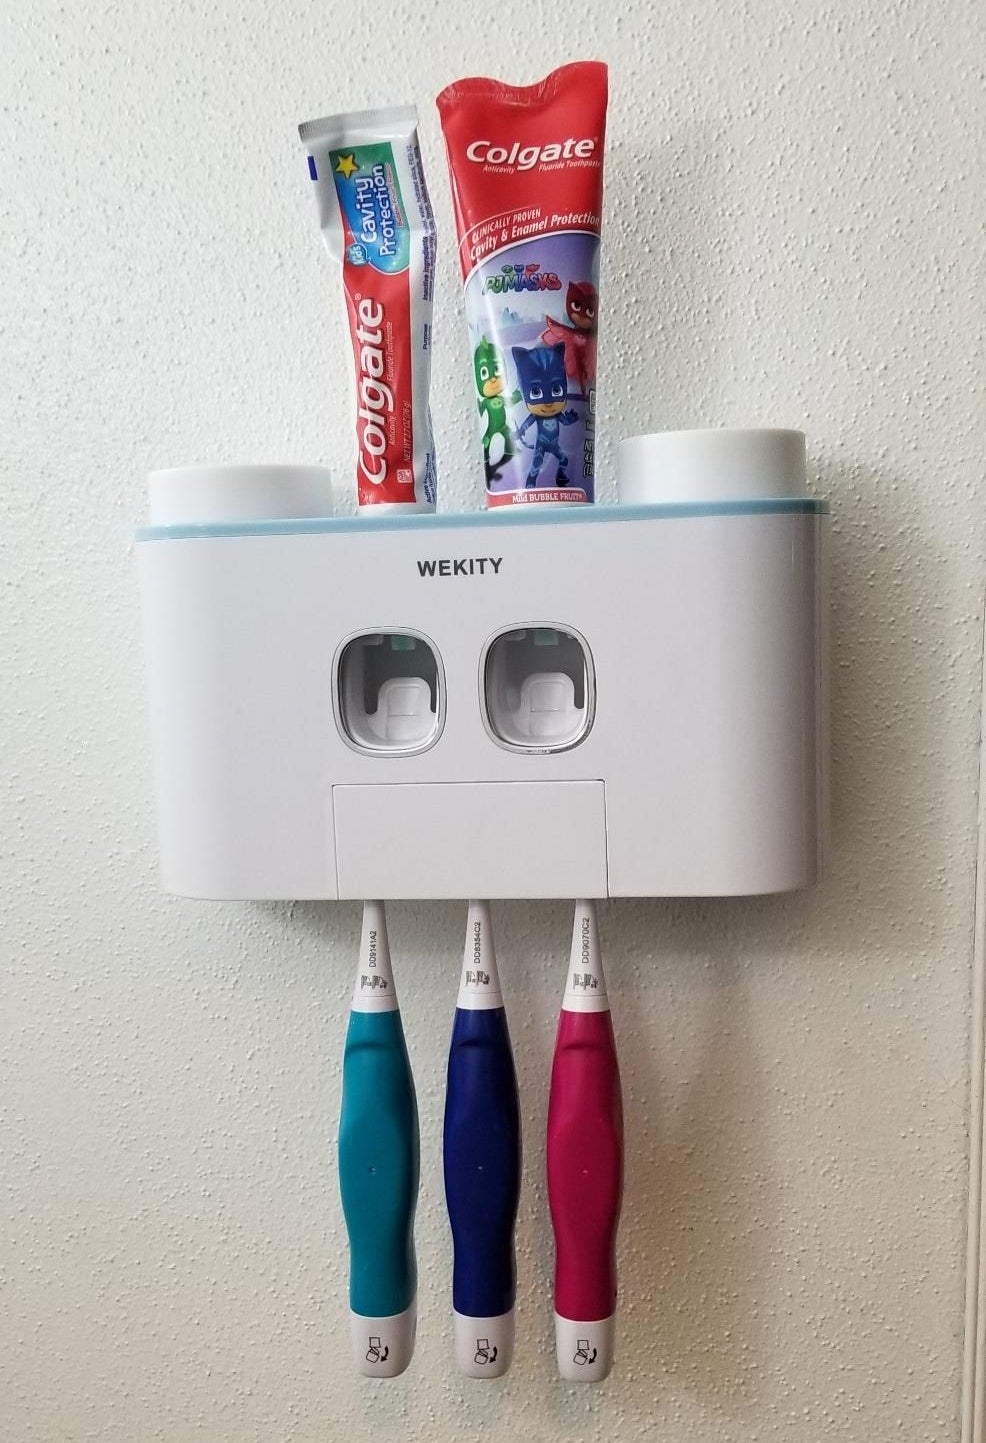 The toothpaste holder holding two tubes and three brushes